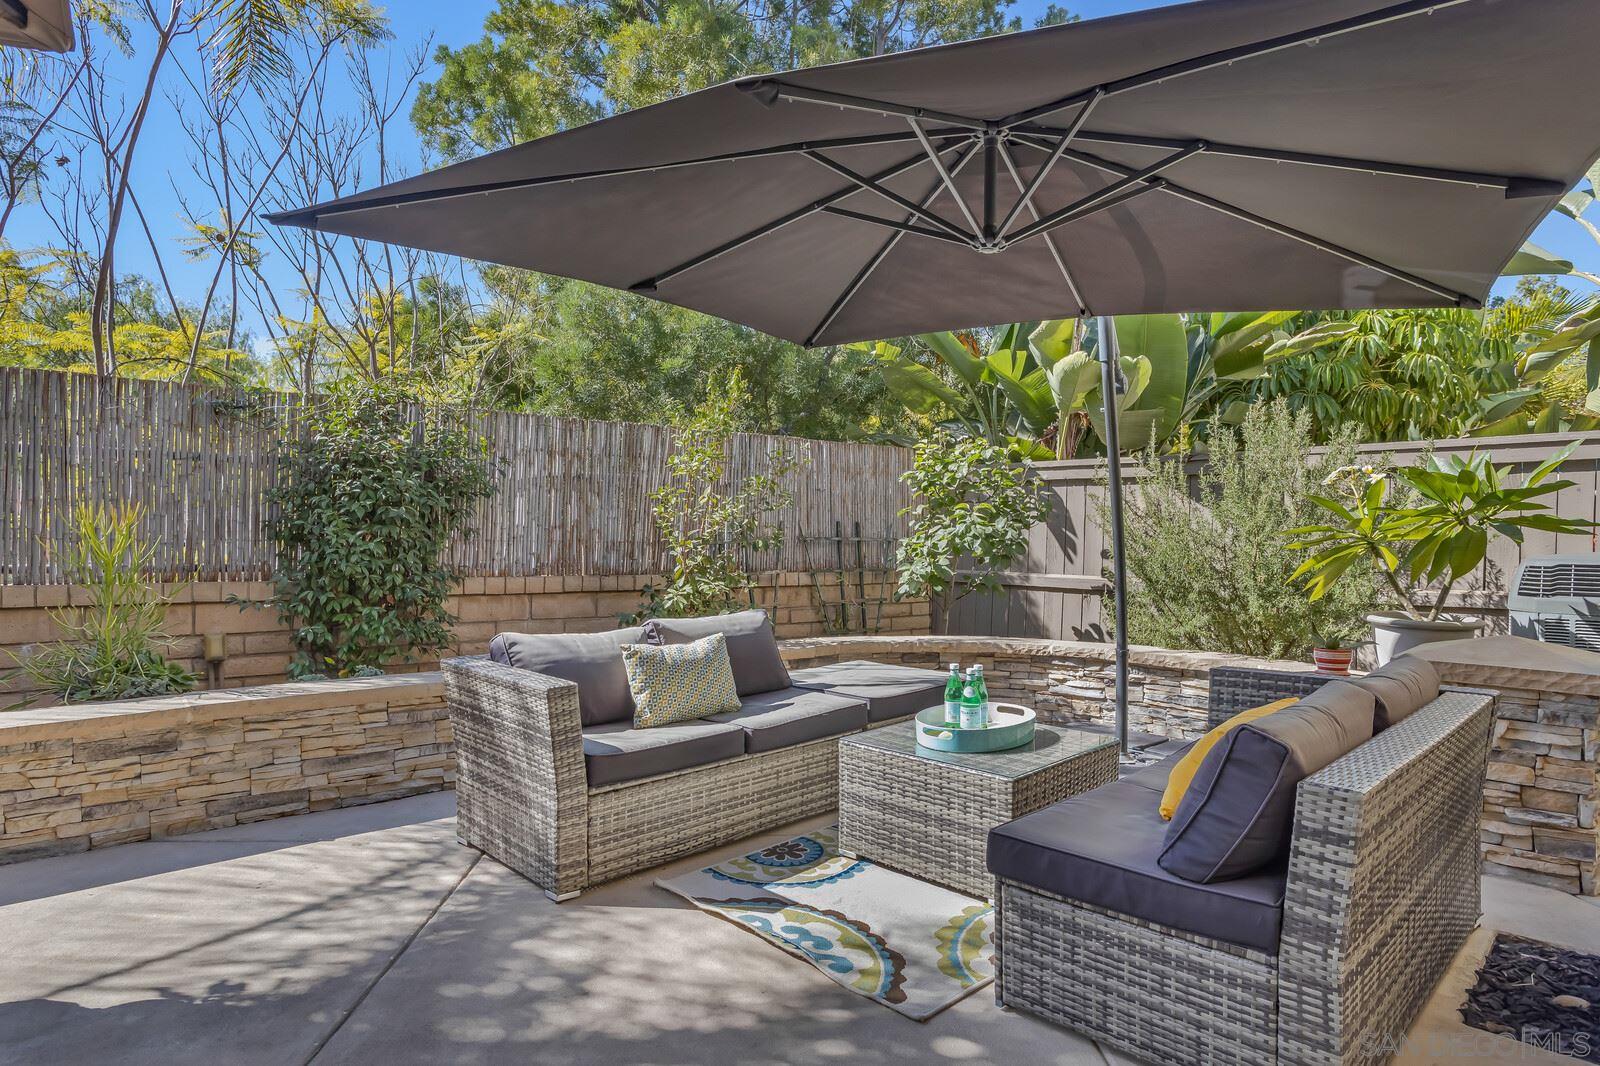 a outdoor living space with furniture and umbrella